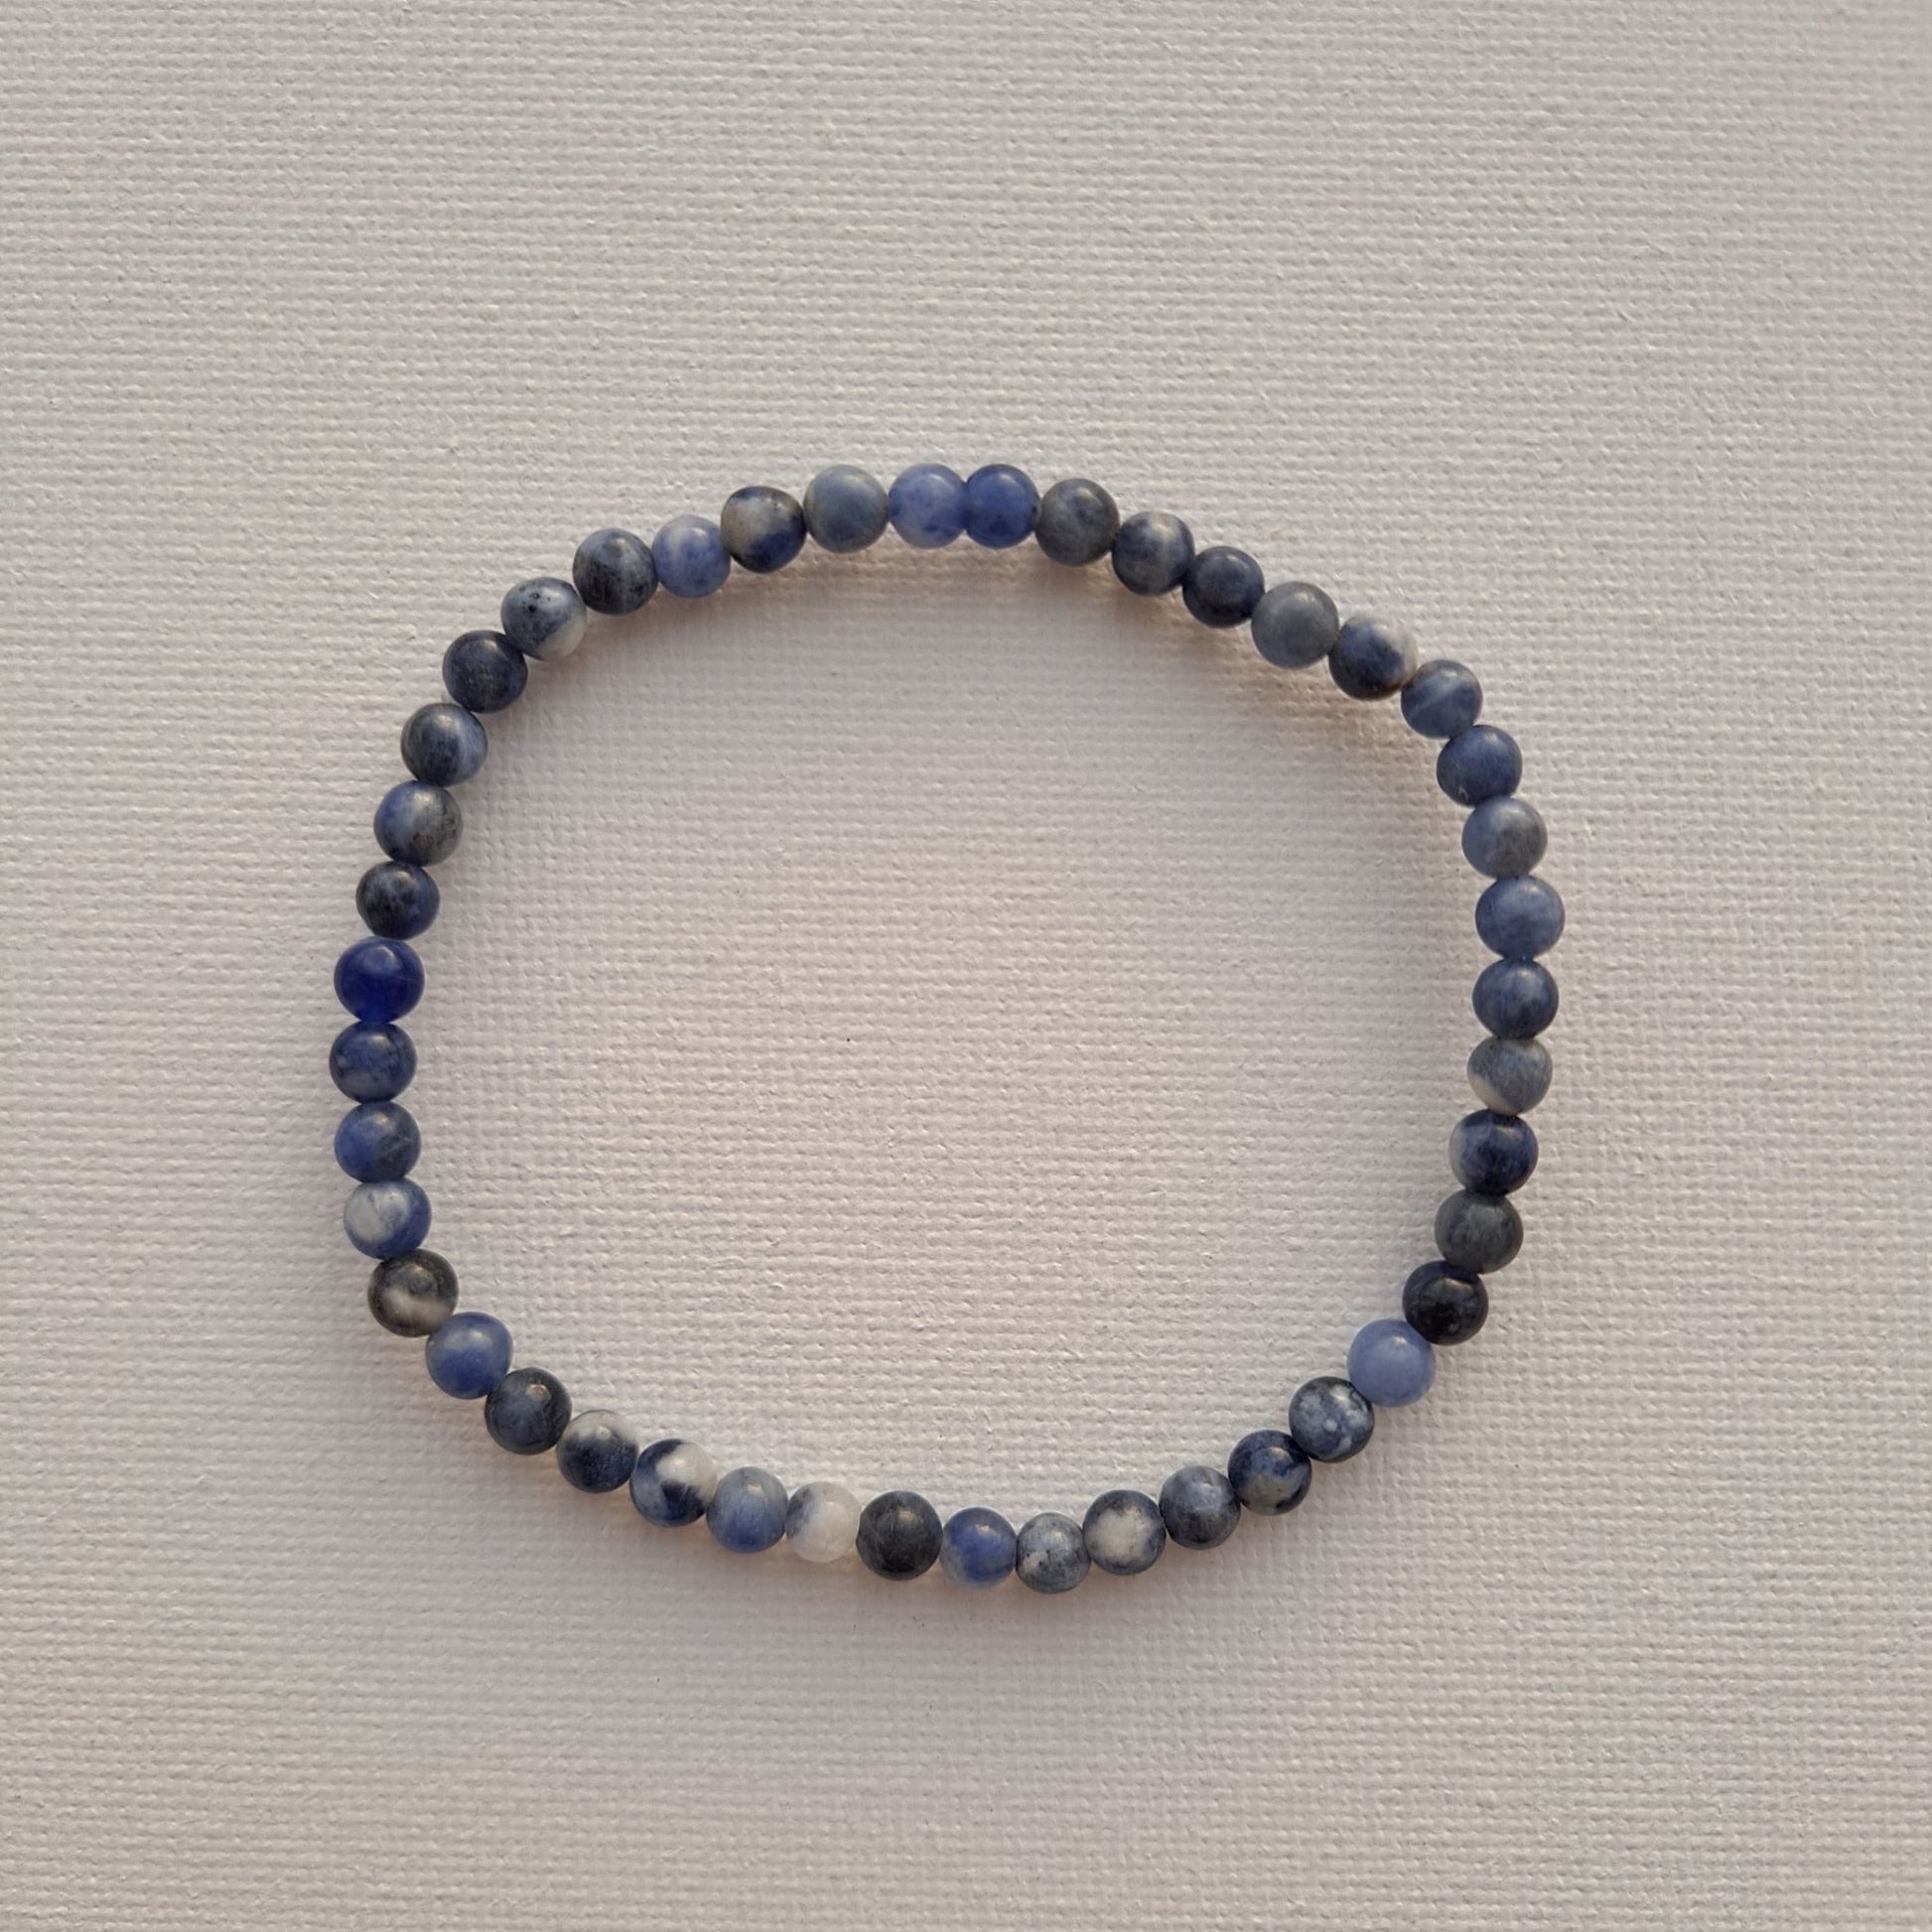 7-Inch Sodalite Stretch Bracelet (4mm Beads) | Dumi's Crystals | Delicate 4mm Sodalite beads strung on a durable stretch cord. This bracelet is believed to promote clear communication, self-expression, inner wisdom, mental clarity, emotional balance, and peace.